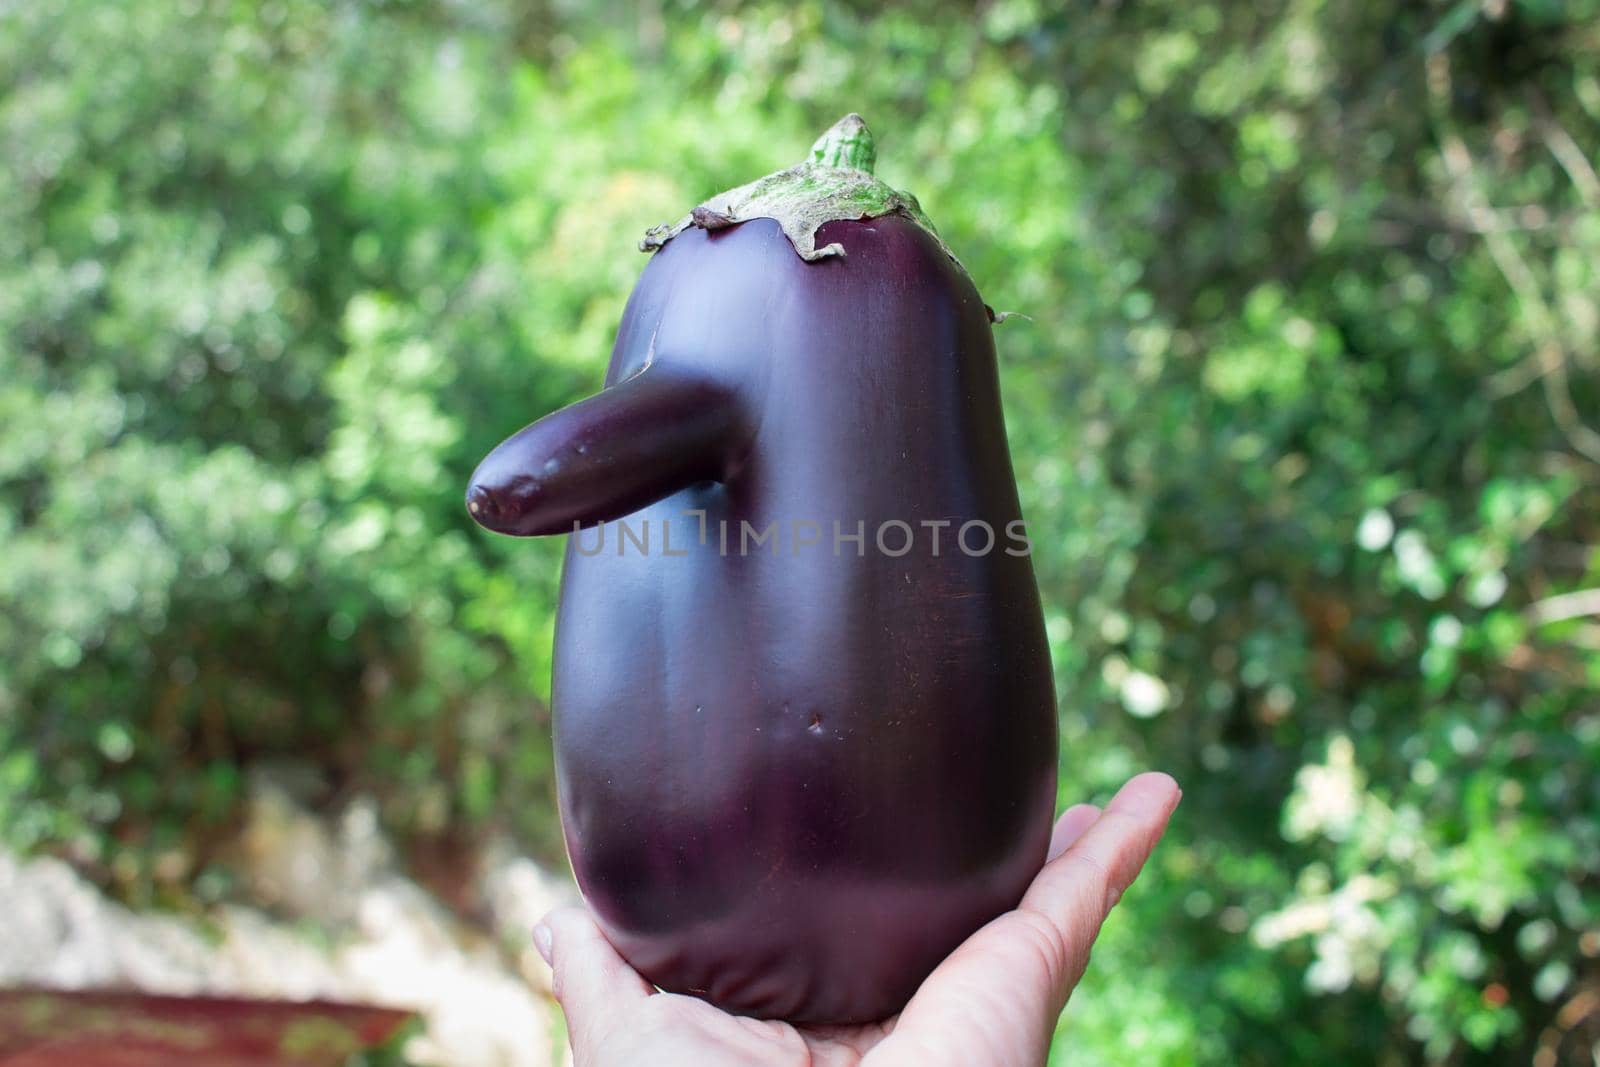 Funny purple natural organic vegetable eggplant with long nose in hand by VeraVerano